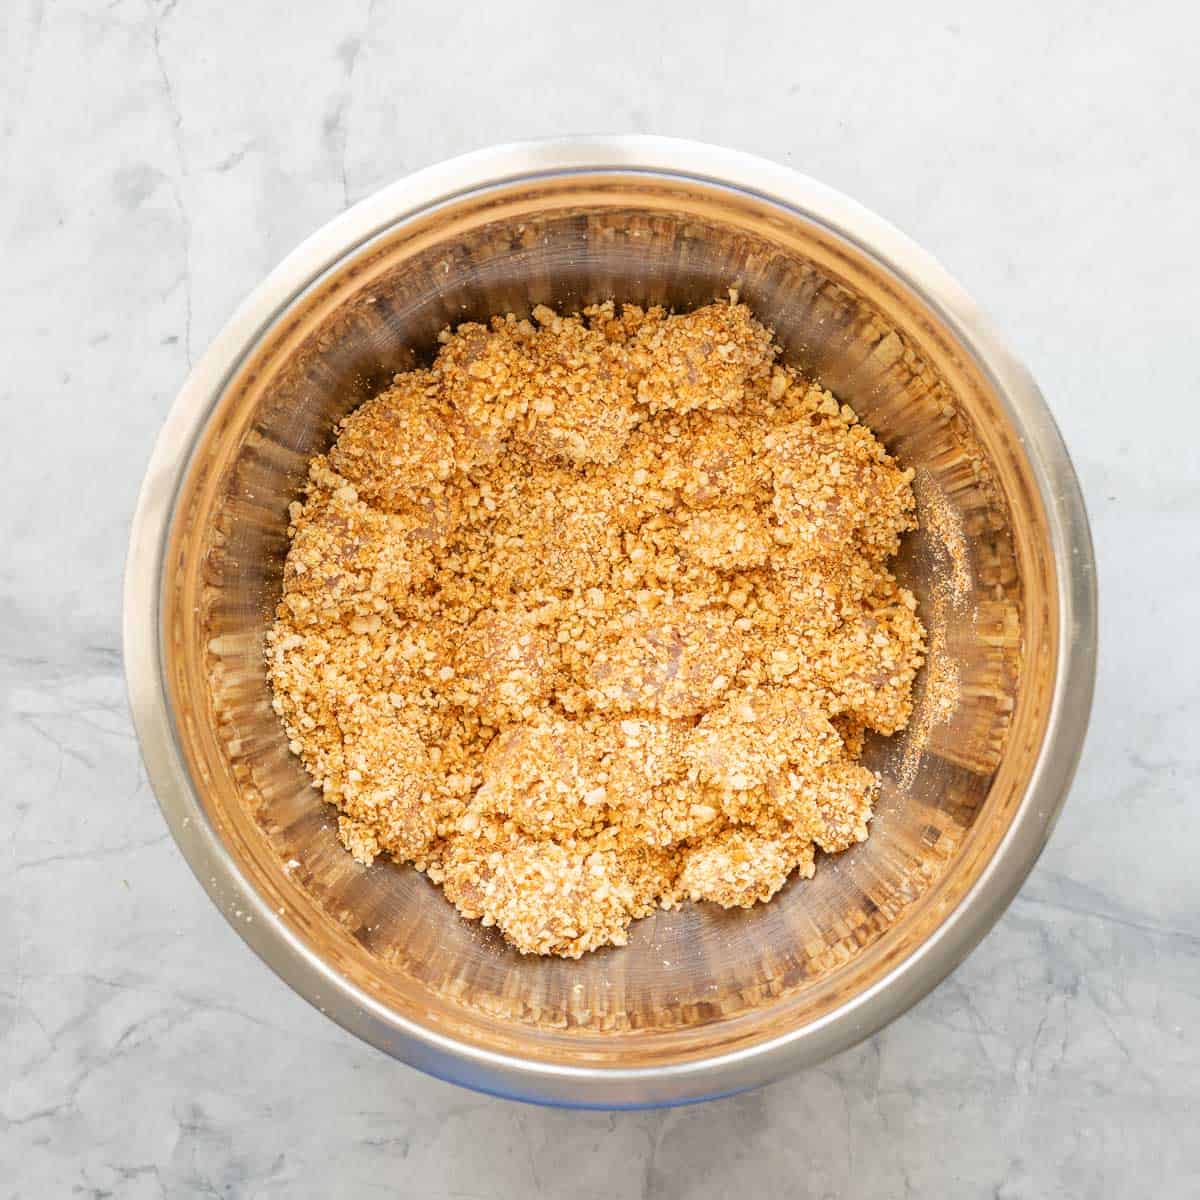 Cubed chicken coated in popcorn crumb in a stainless steel mixing bowl. 